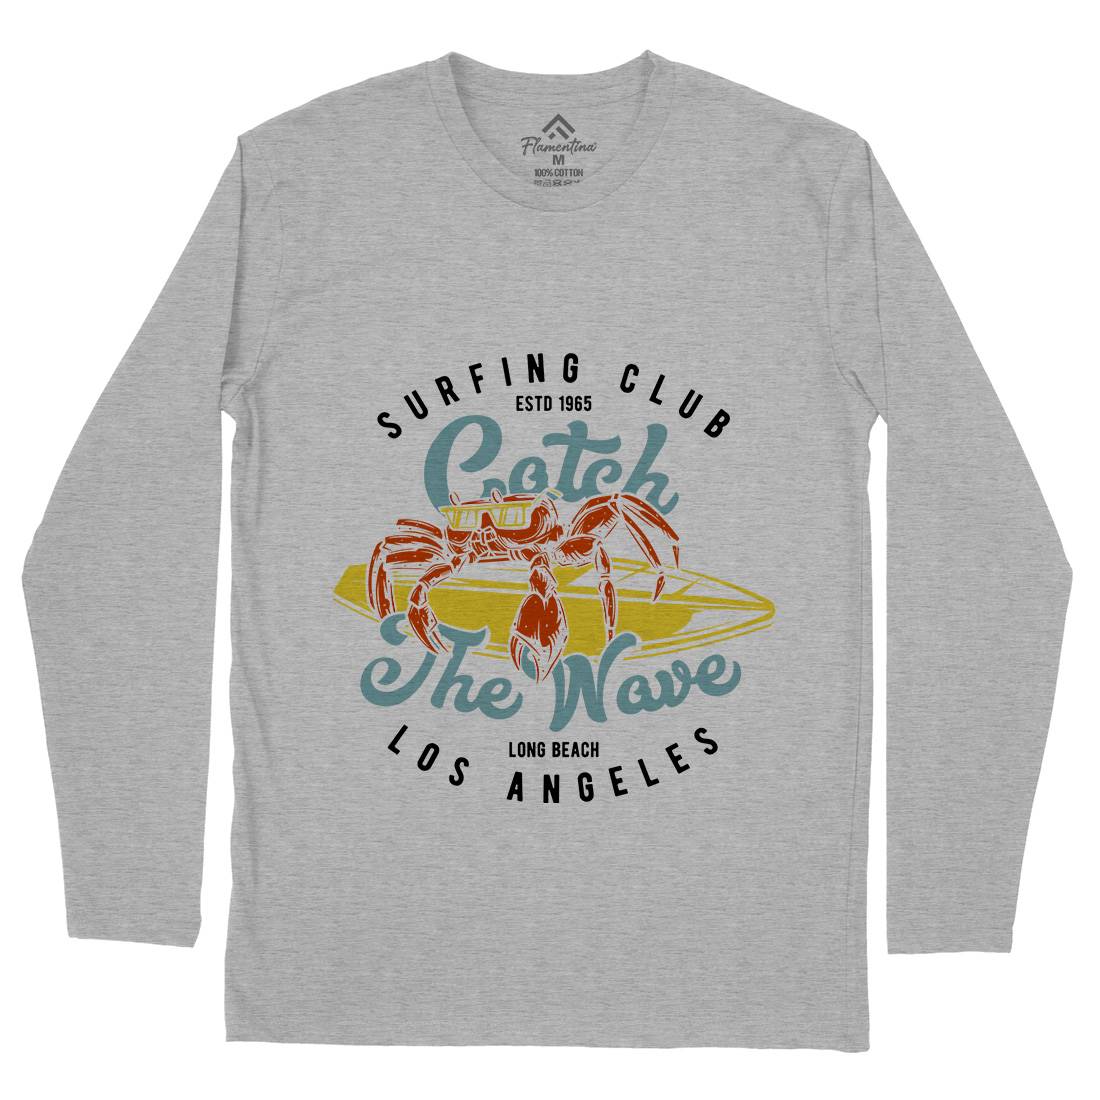 Catch The Wave Surfing Mens Long Sleeve T-Shirt Surf B877